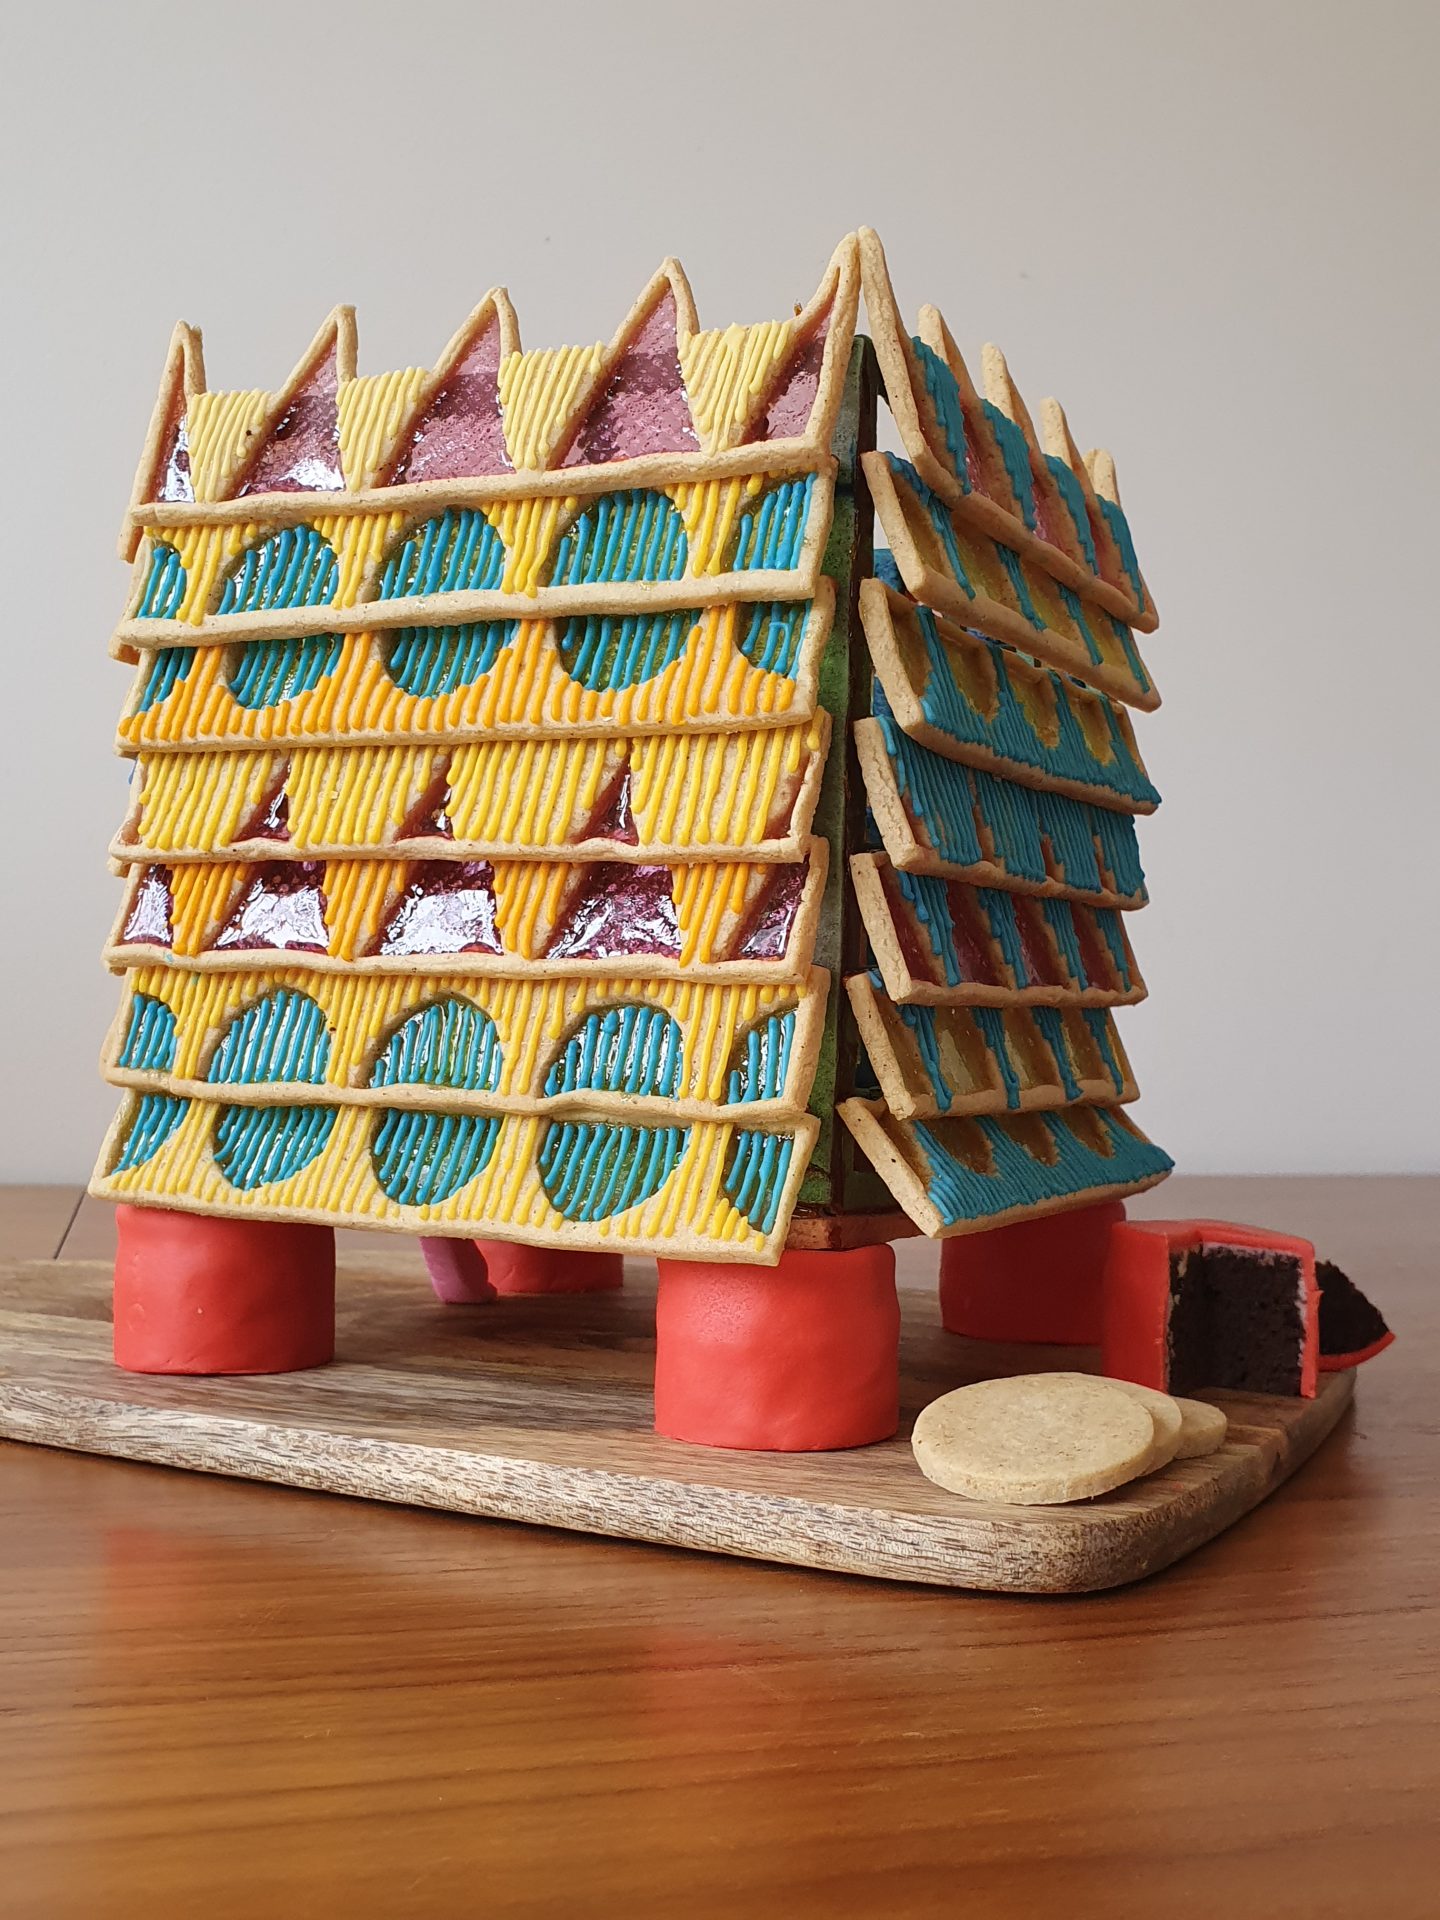 Architecture Bake Off – Overall Winner Announced